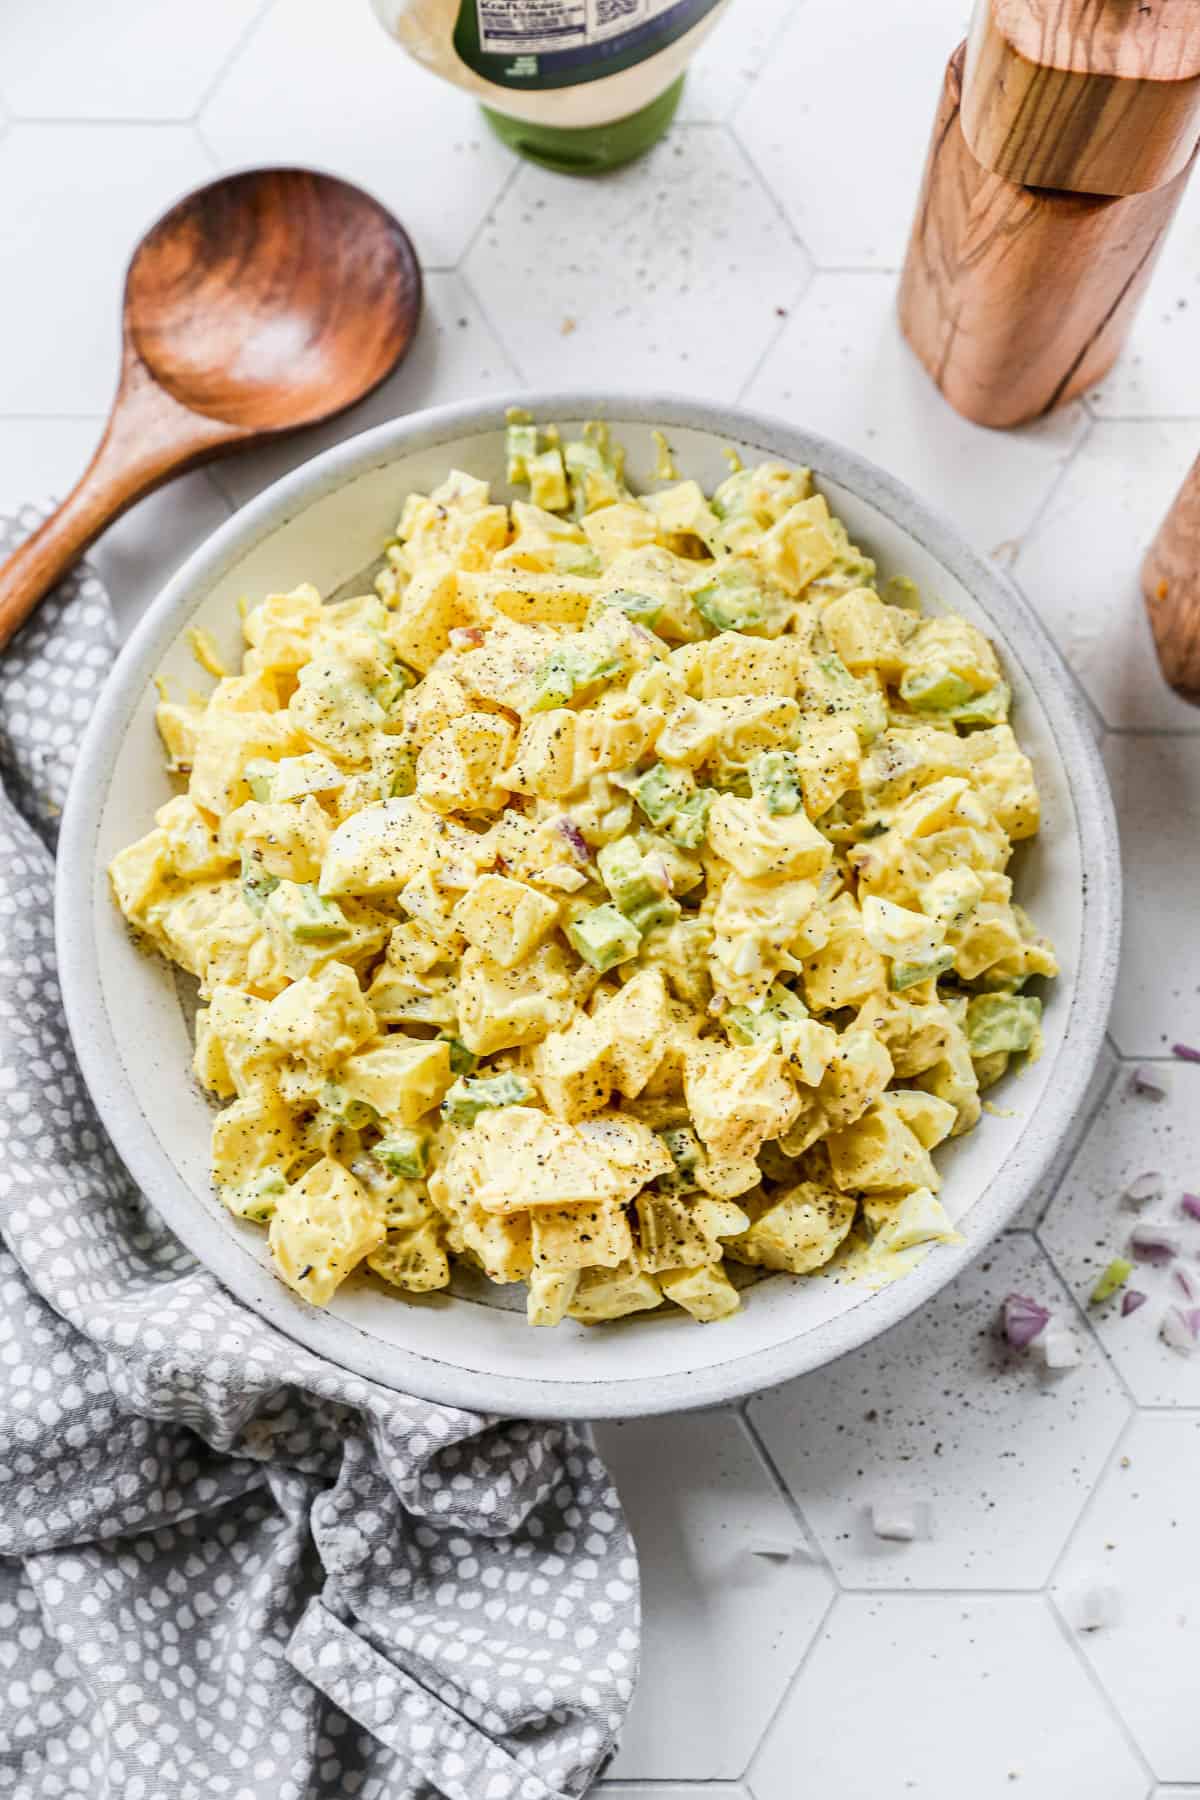 The best Potato Salad recipe with boiled eggs, celery, and chopped potatoes all covered in a creamy dressing. 